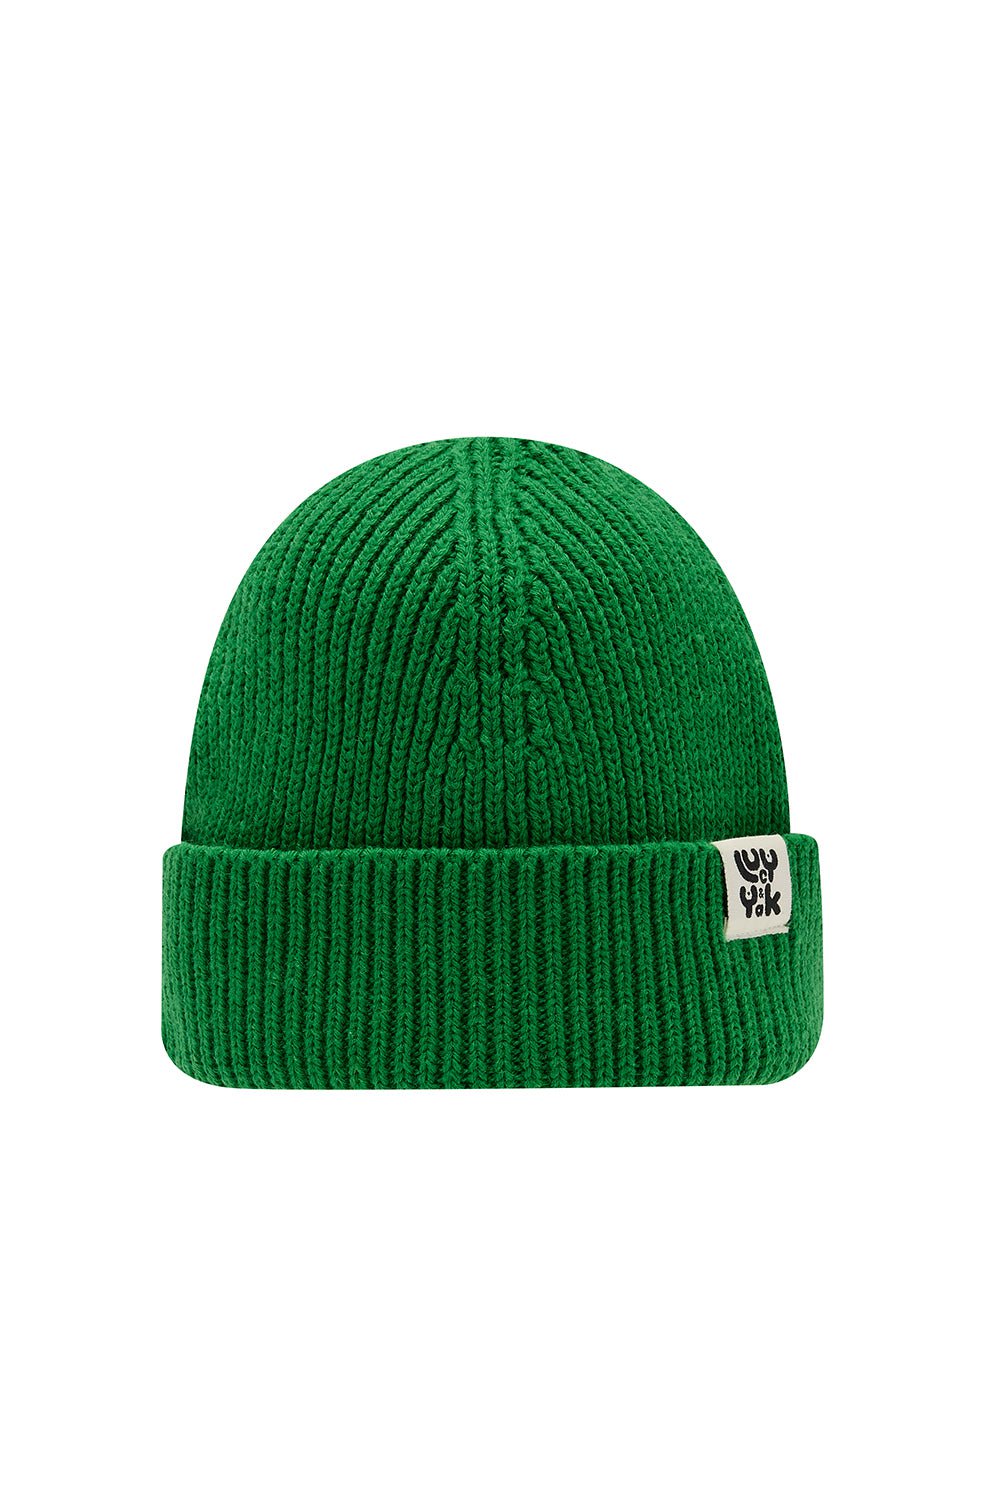 Lucy & Yak Hats Luca Beanie: RECYCLED POLYESTER - Kelly Green